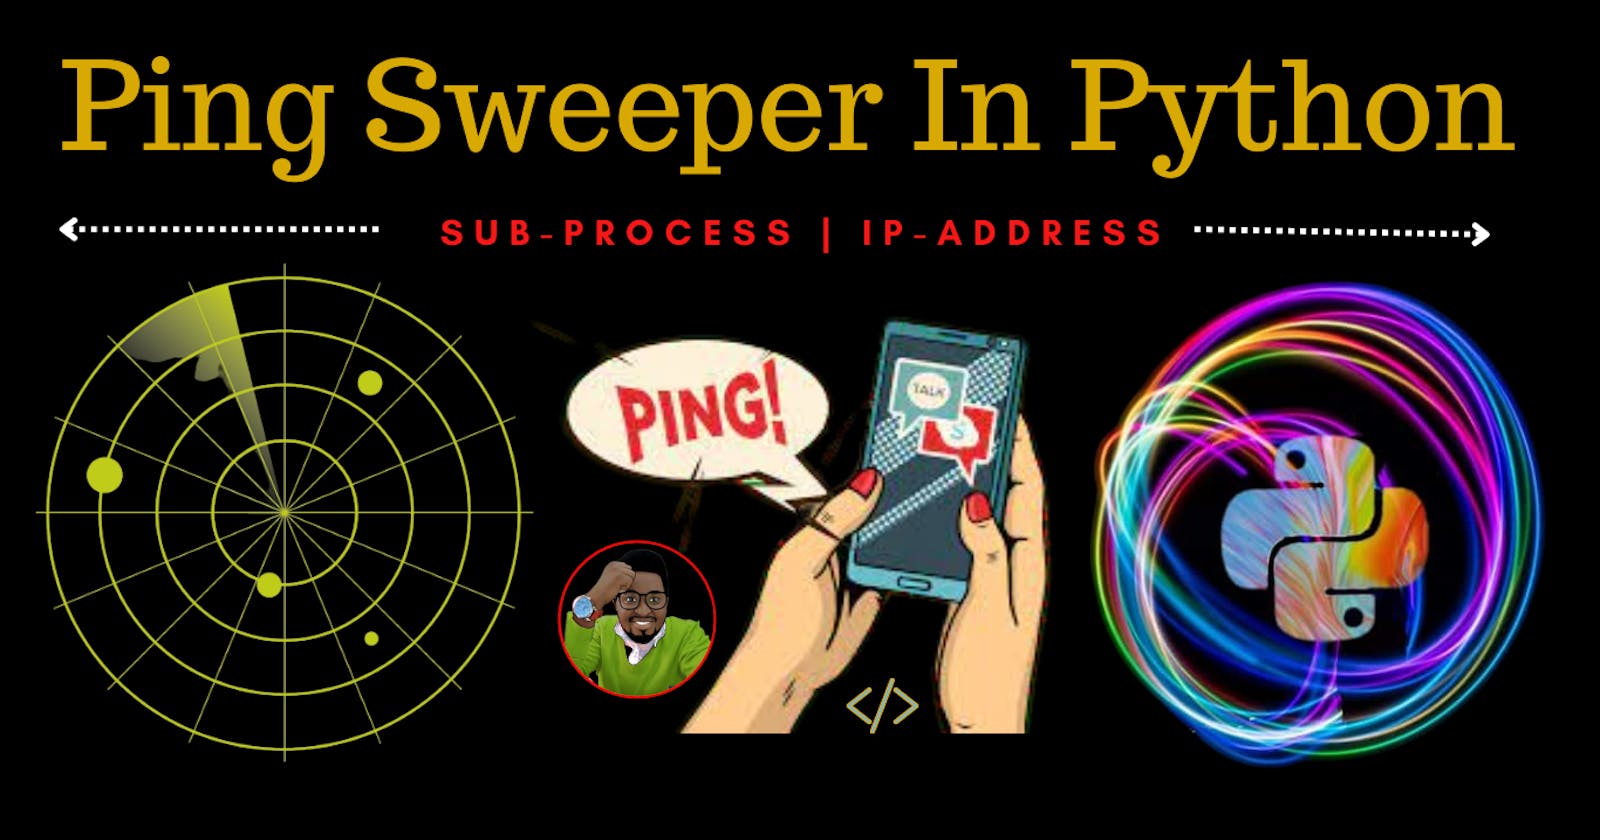 Ping Sweeper In Python